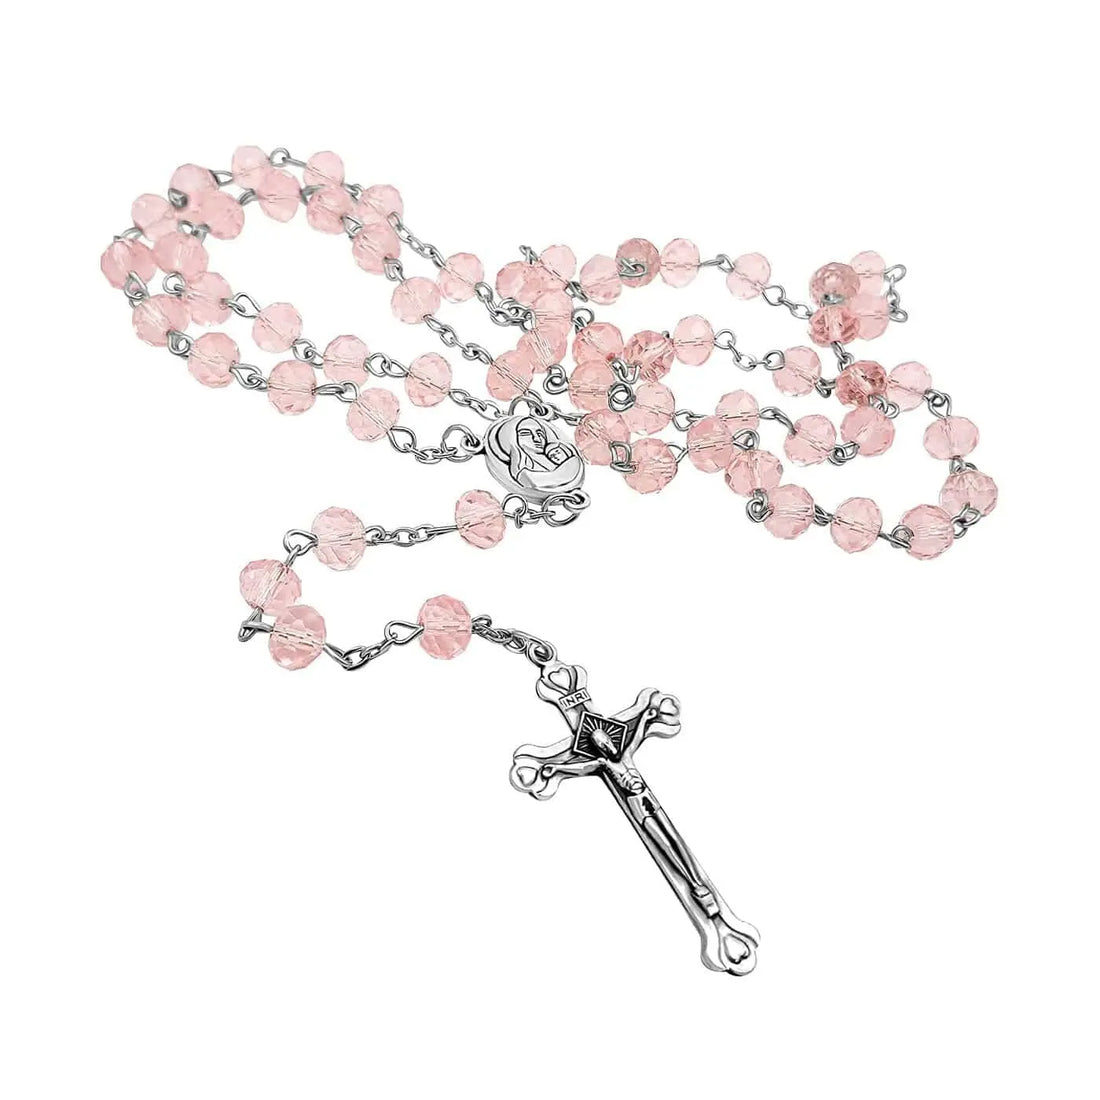 Light Pink Crystal Beads Rosary Catholic Necklace Holy Soil Medal 